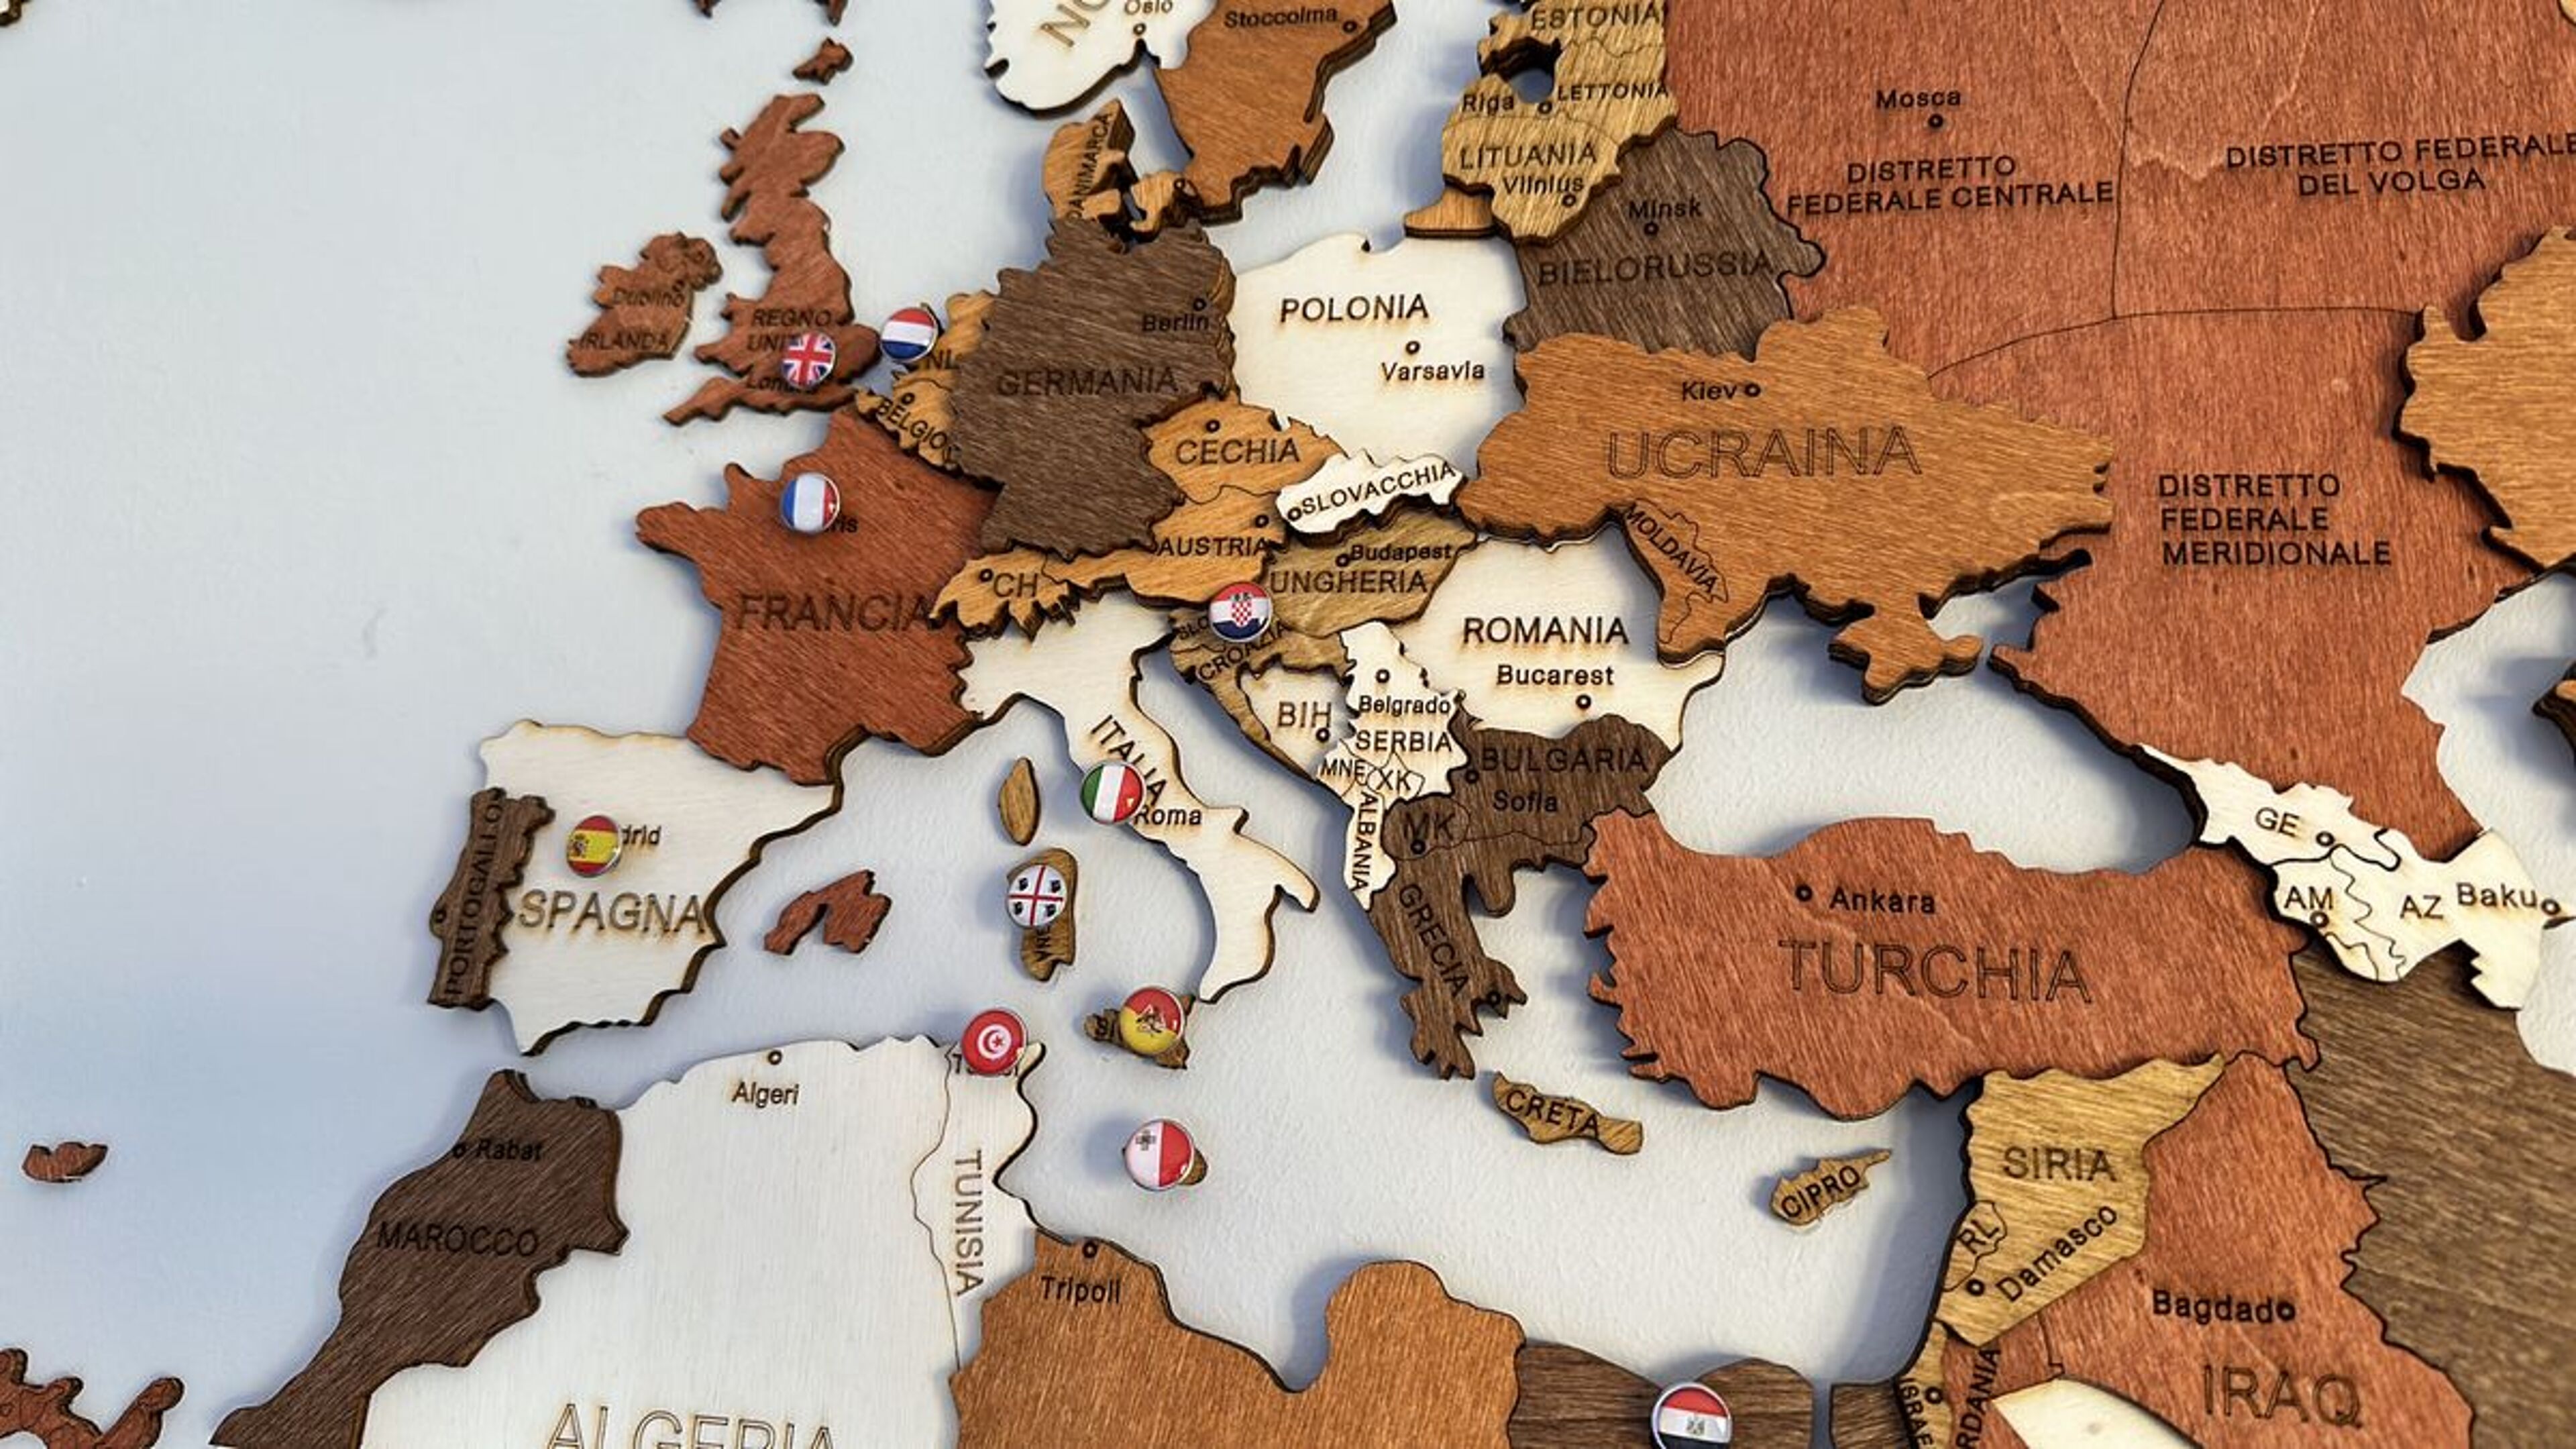 Review for Wooden World Map Wall Decoration - image from Marco Chiola